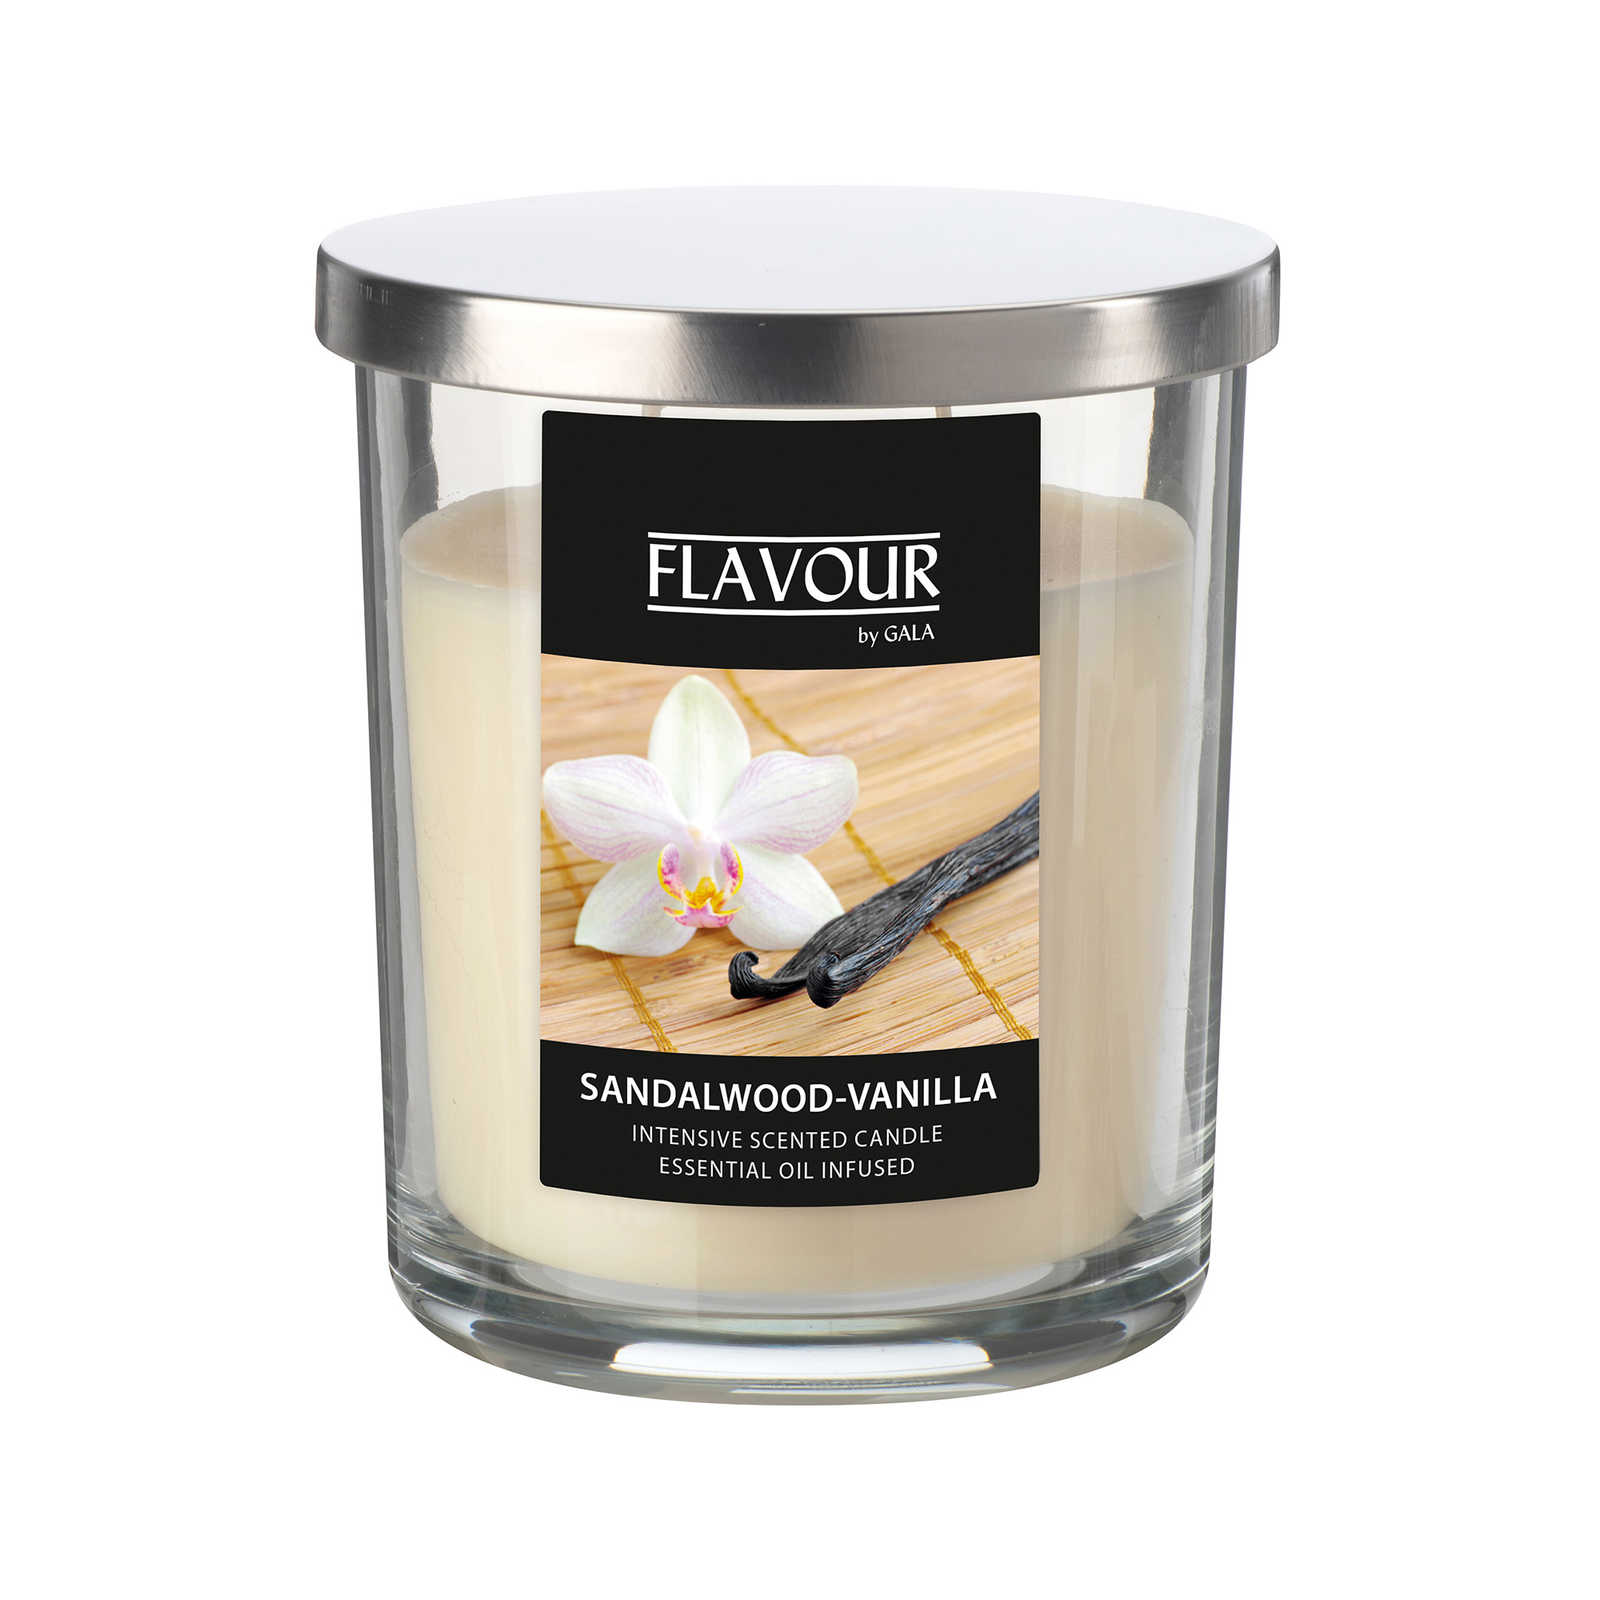         Sandalwood and Vanilla Scented Candle with Sensual Fragrance - 380g
    